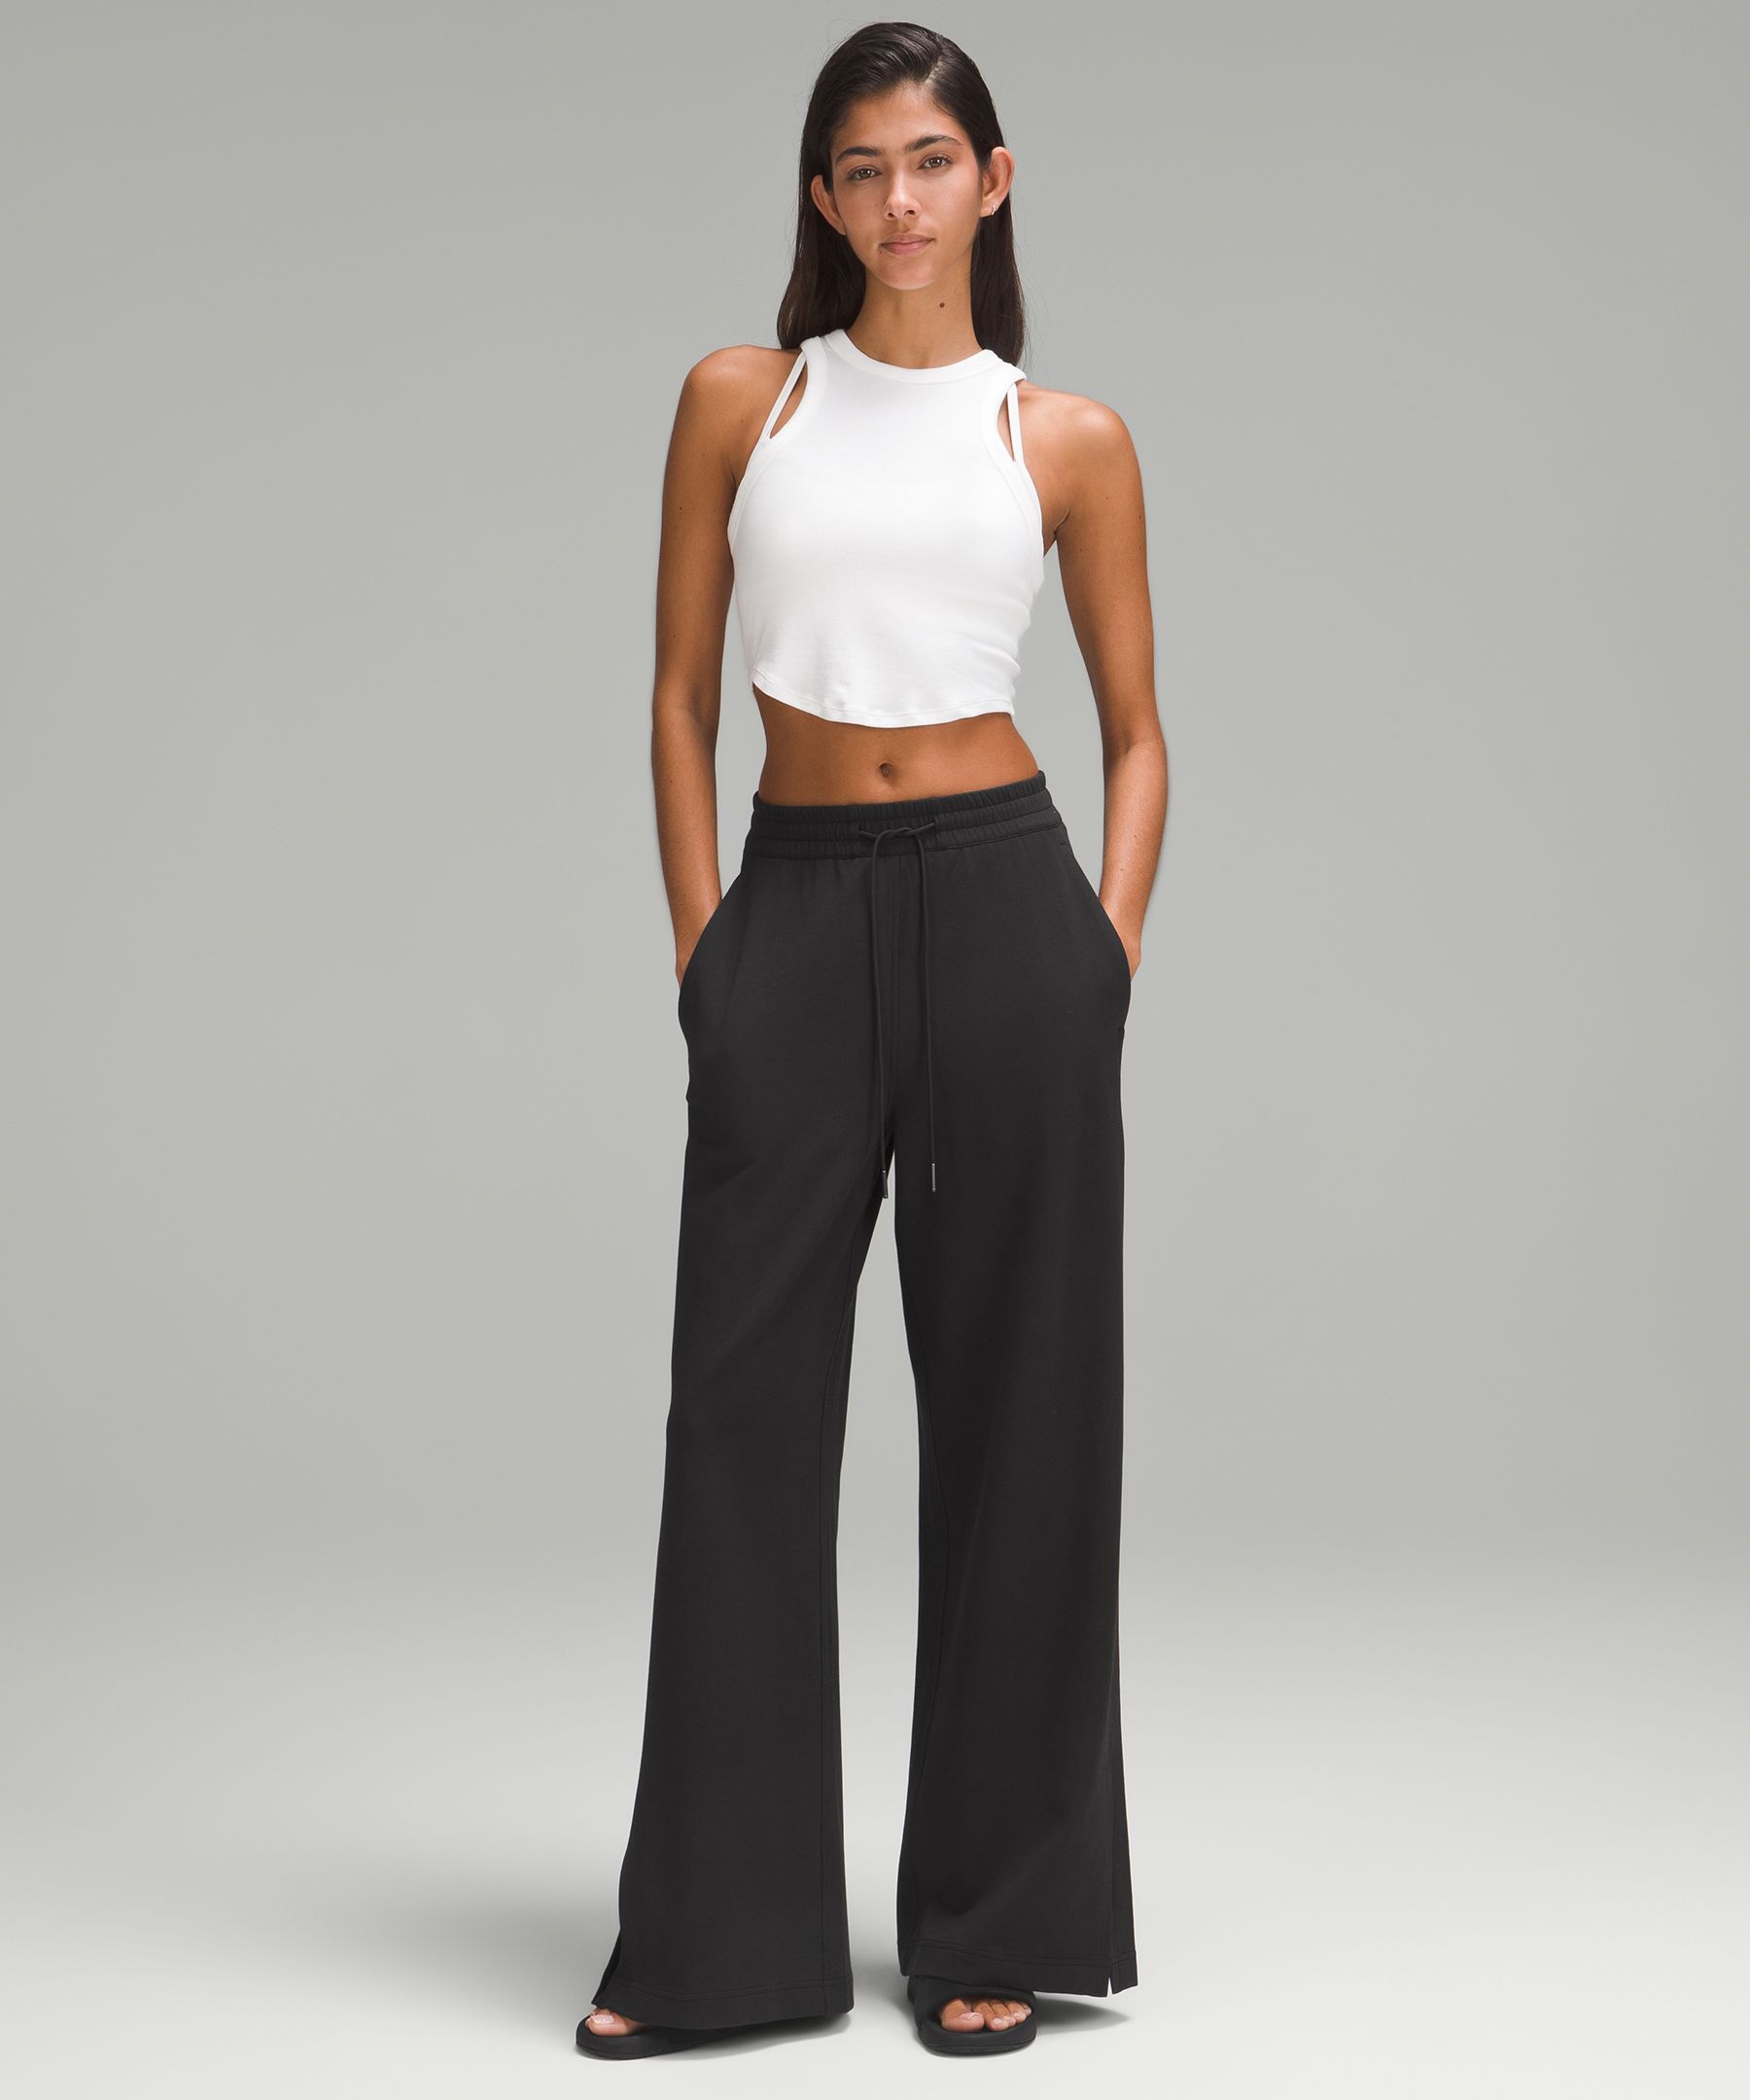 French Terry Full Length Dance Pants